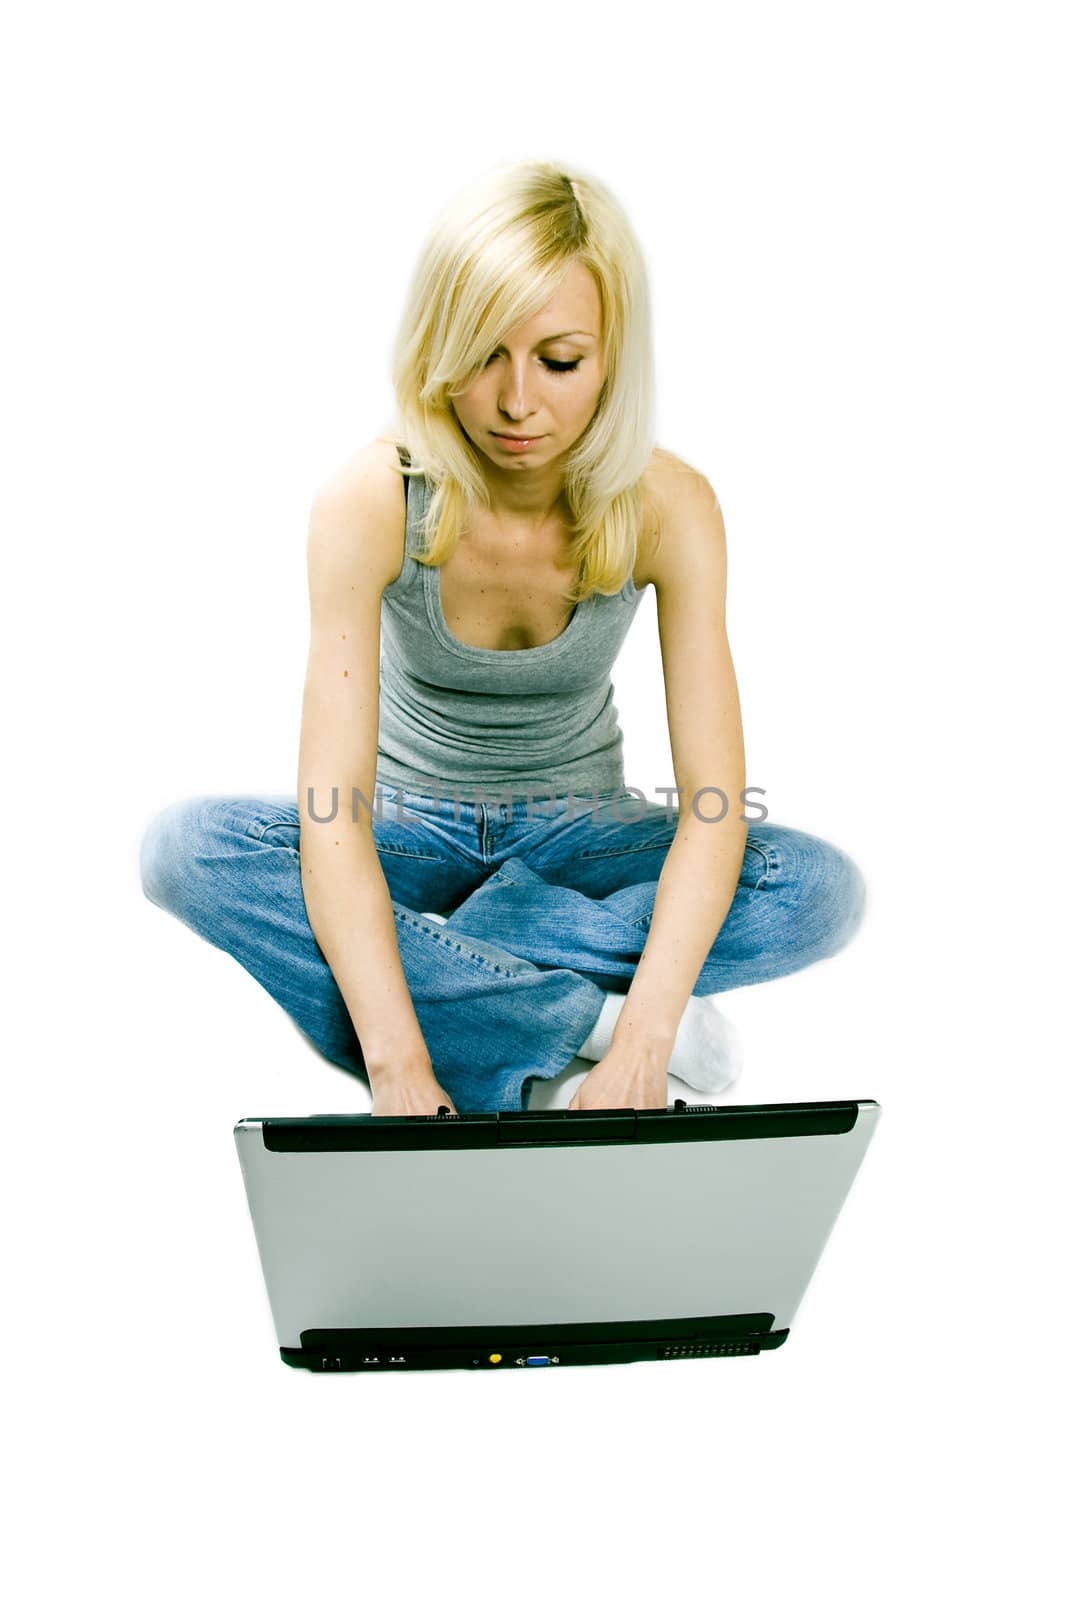 A studio shoot of a beautiful young girl sitting with a computer on the floor and writing